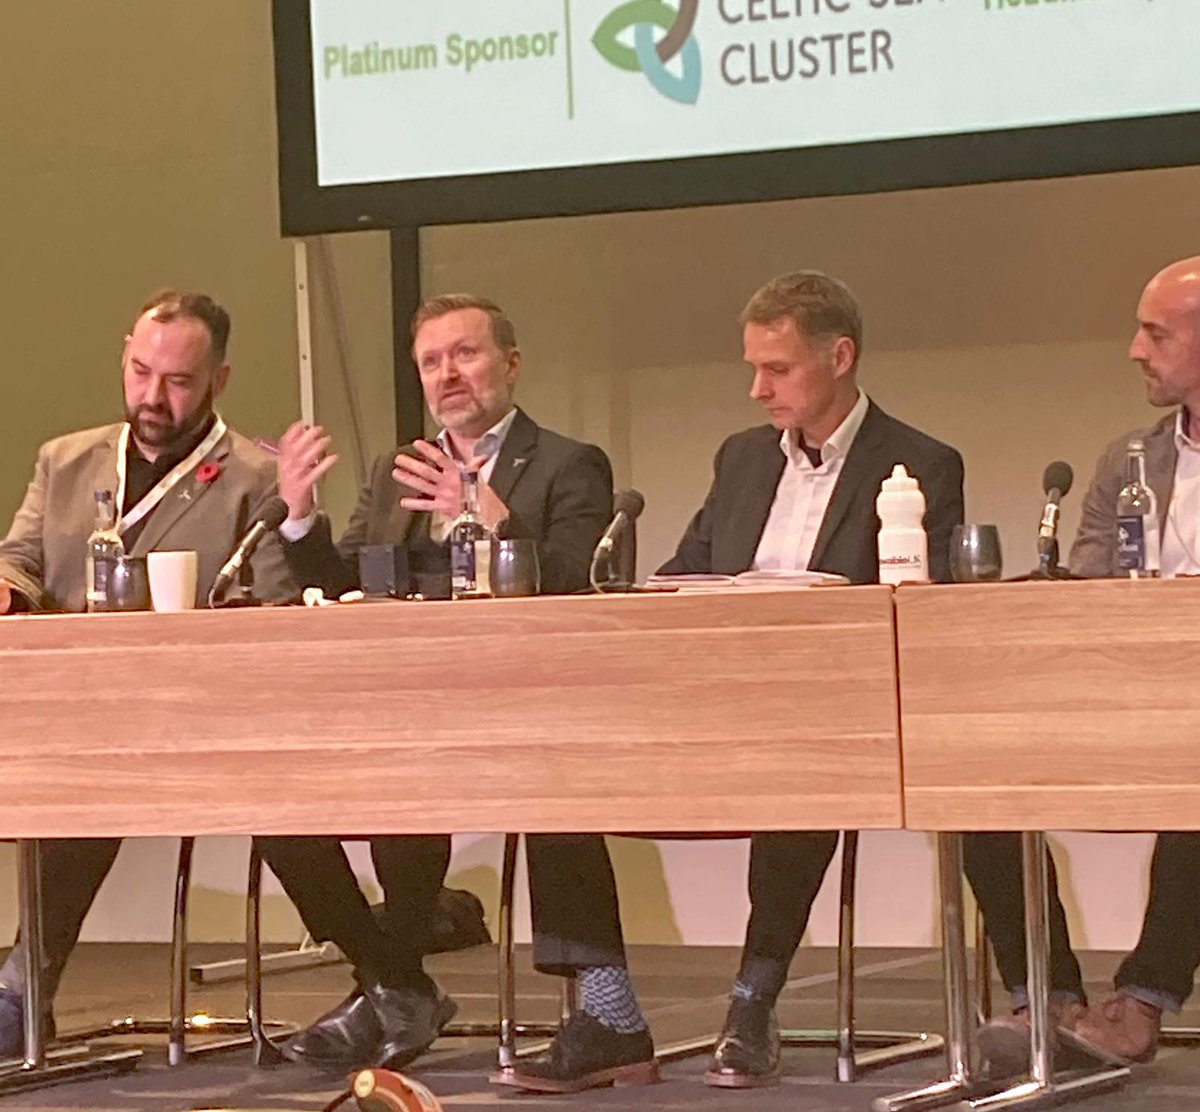 Andy Reay, ABP's Head of Commercial Development for offshore wind speaking on the 'Getting the technology right' panel at the #FutureEnergyWales conference in Newport today.
#NetZeroWales
1/2